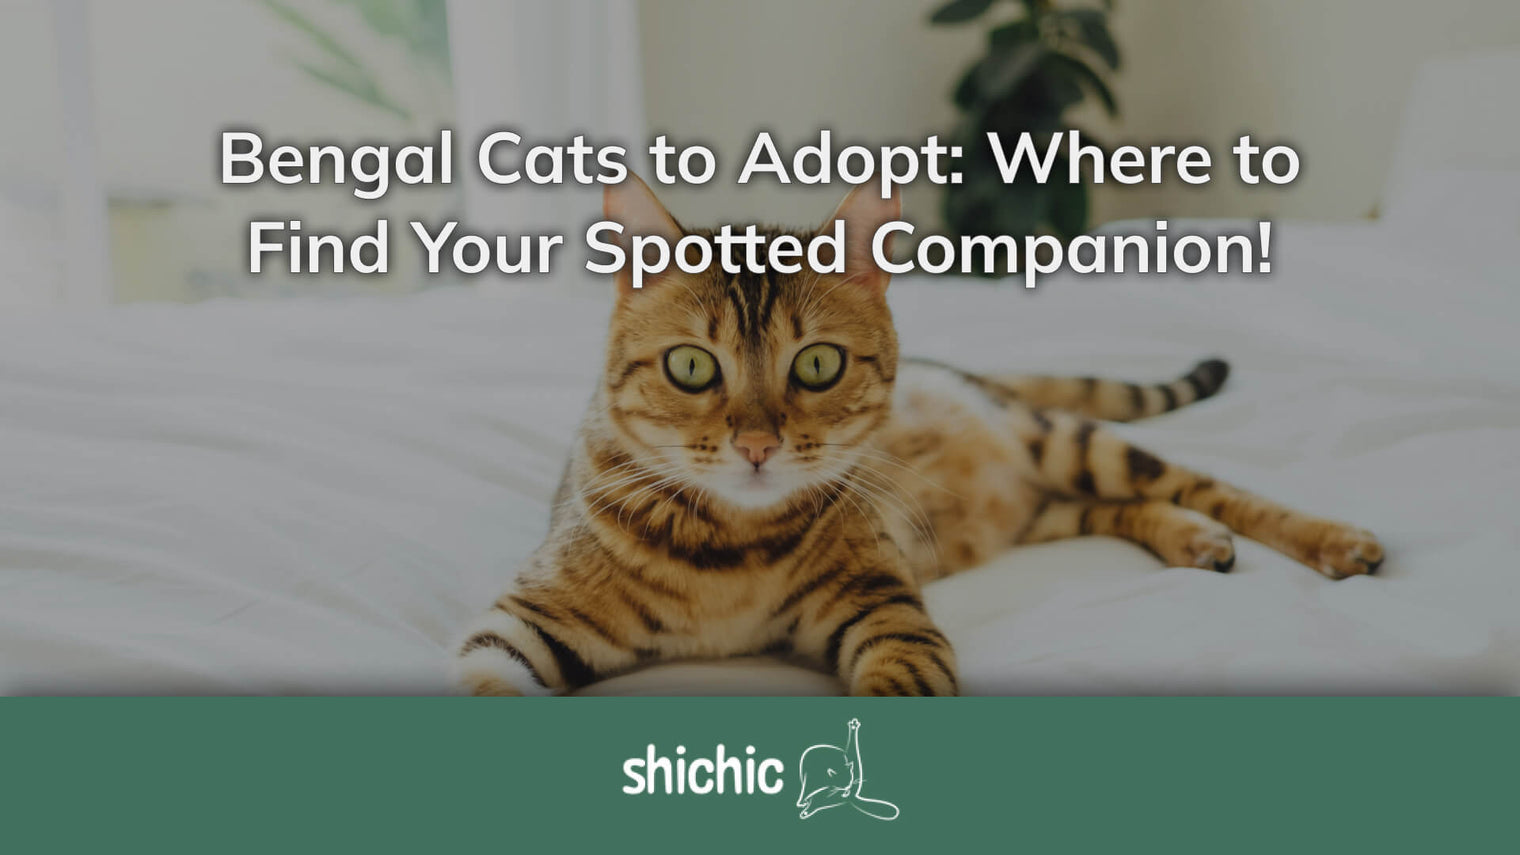 Bengal Cats to Adopt: Where to Find Your Spotted Companion! - Shichic